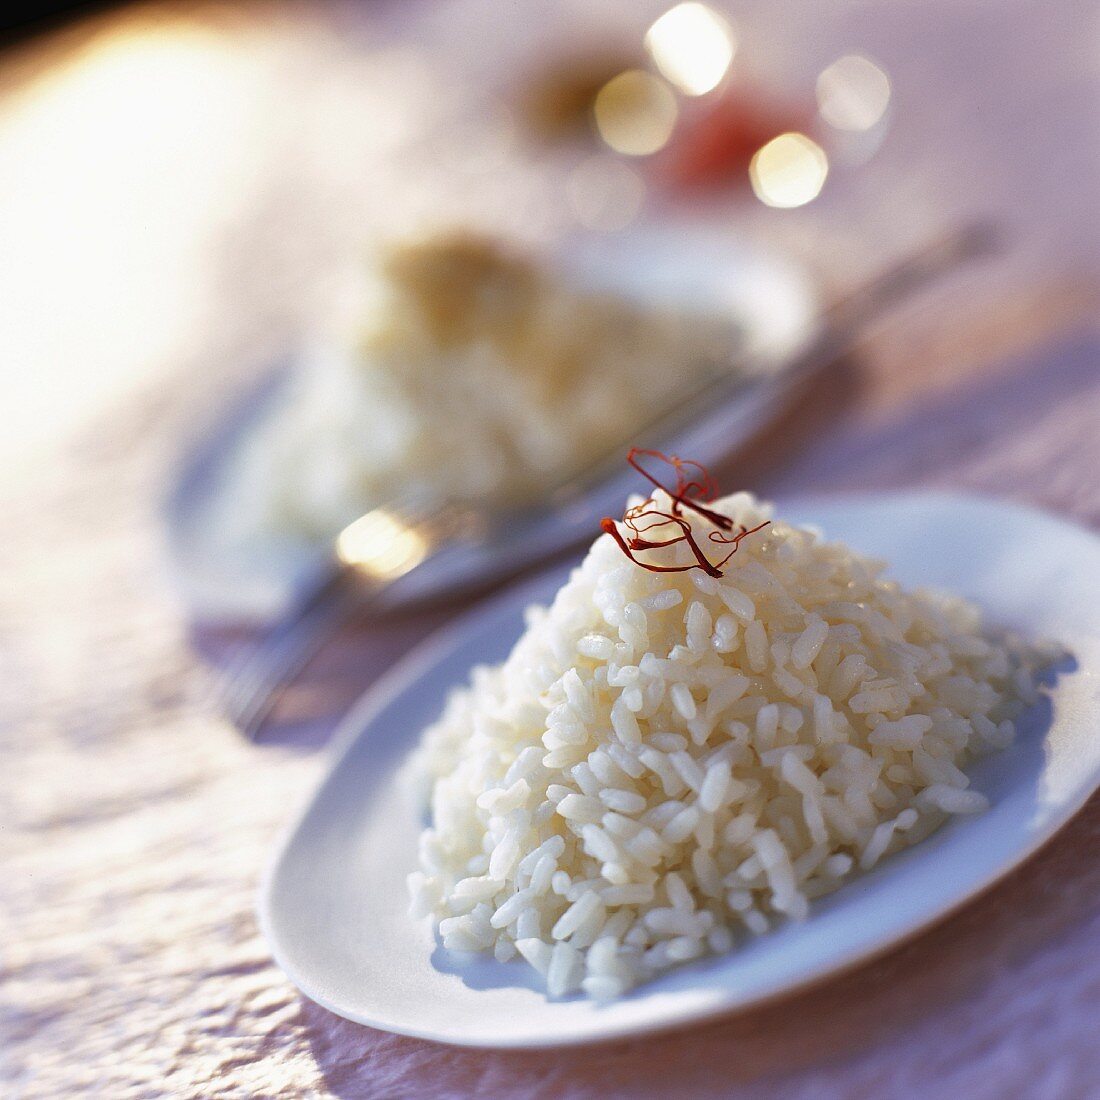 Cooked white rice with saffron strands